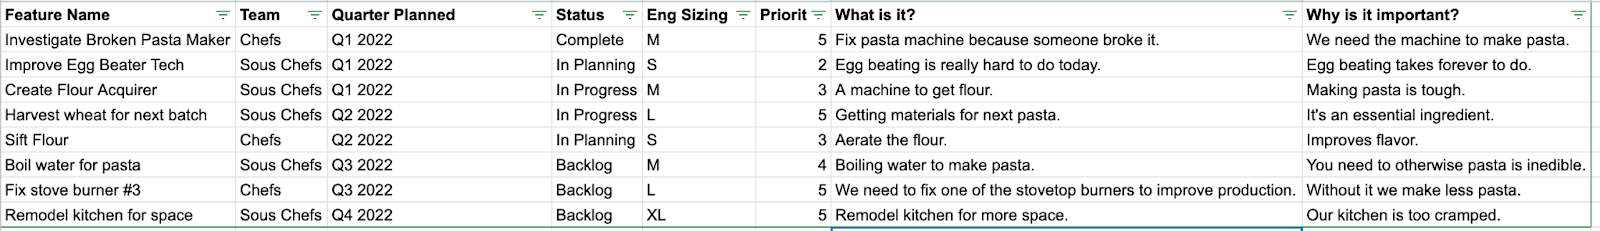 Using Google Sheets to build a product roadmap